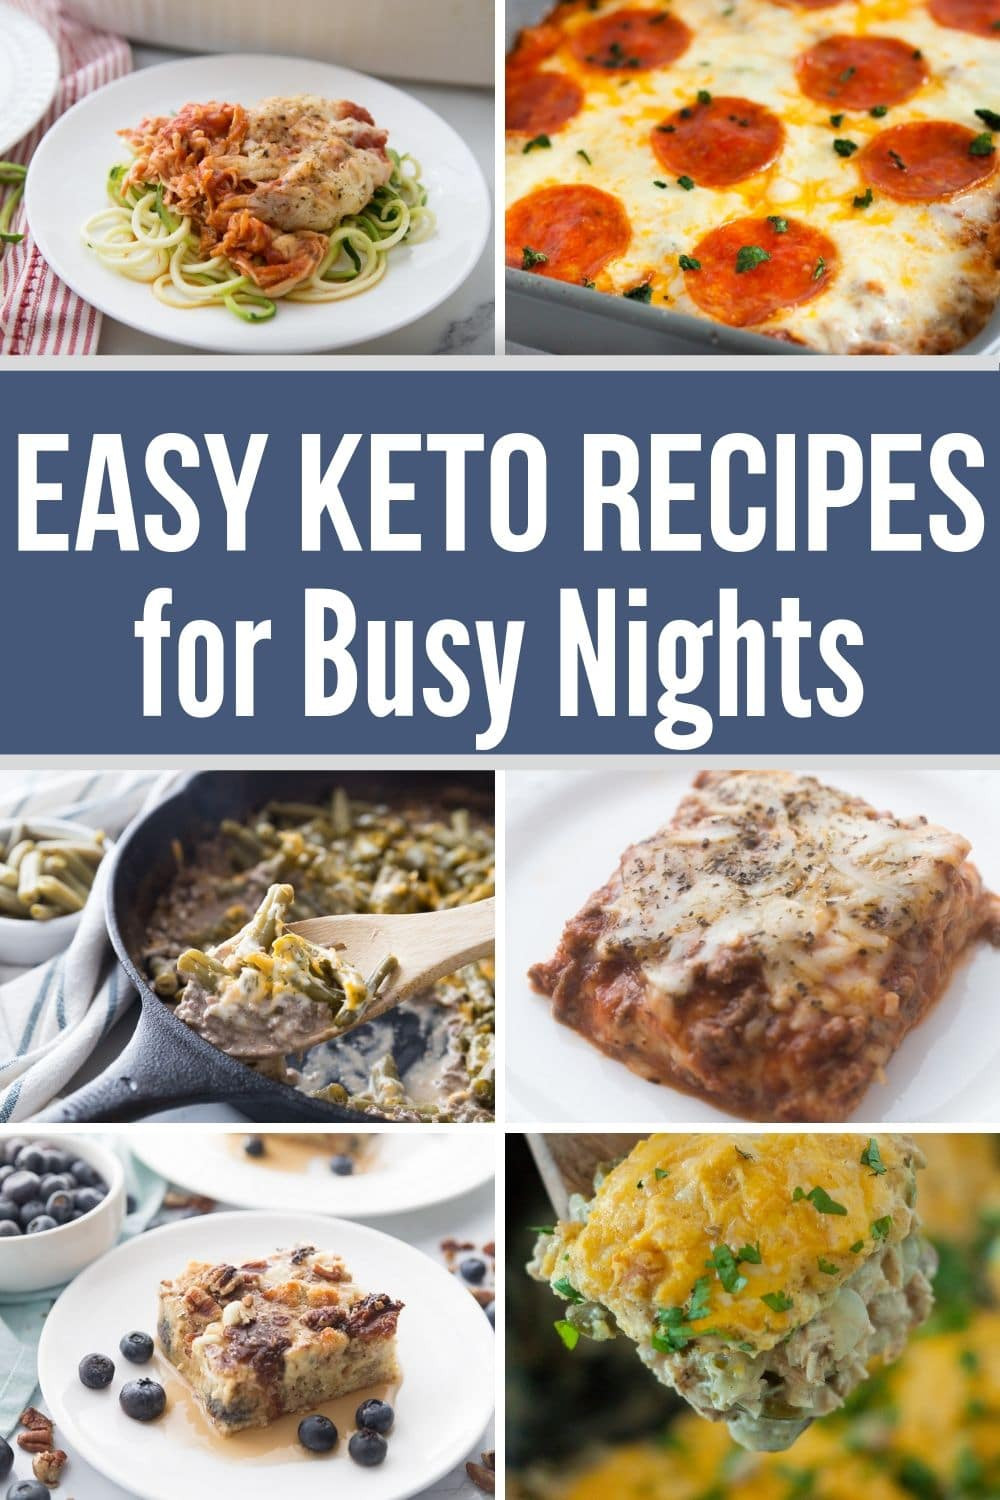 Keto Diet Recipies
 Easy Keto Diet Recipes for Busy Nights